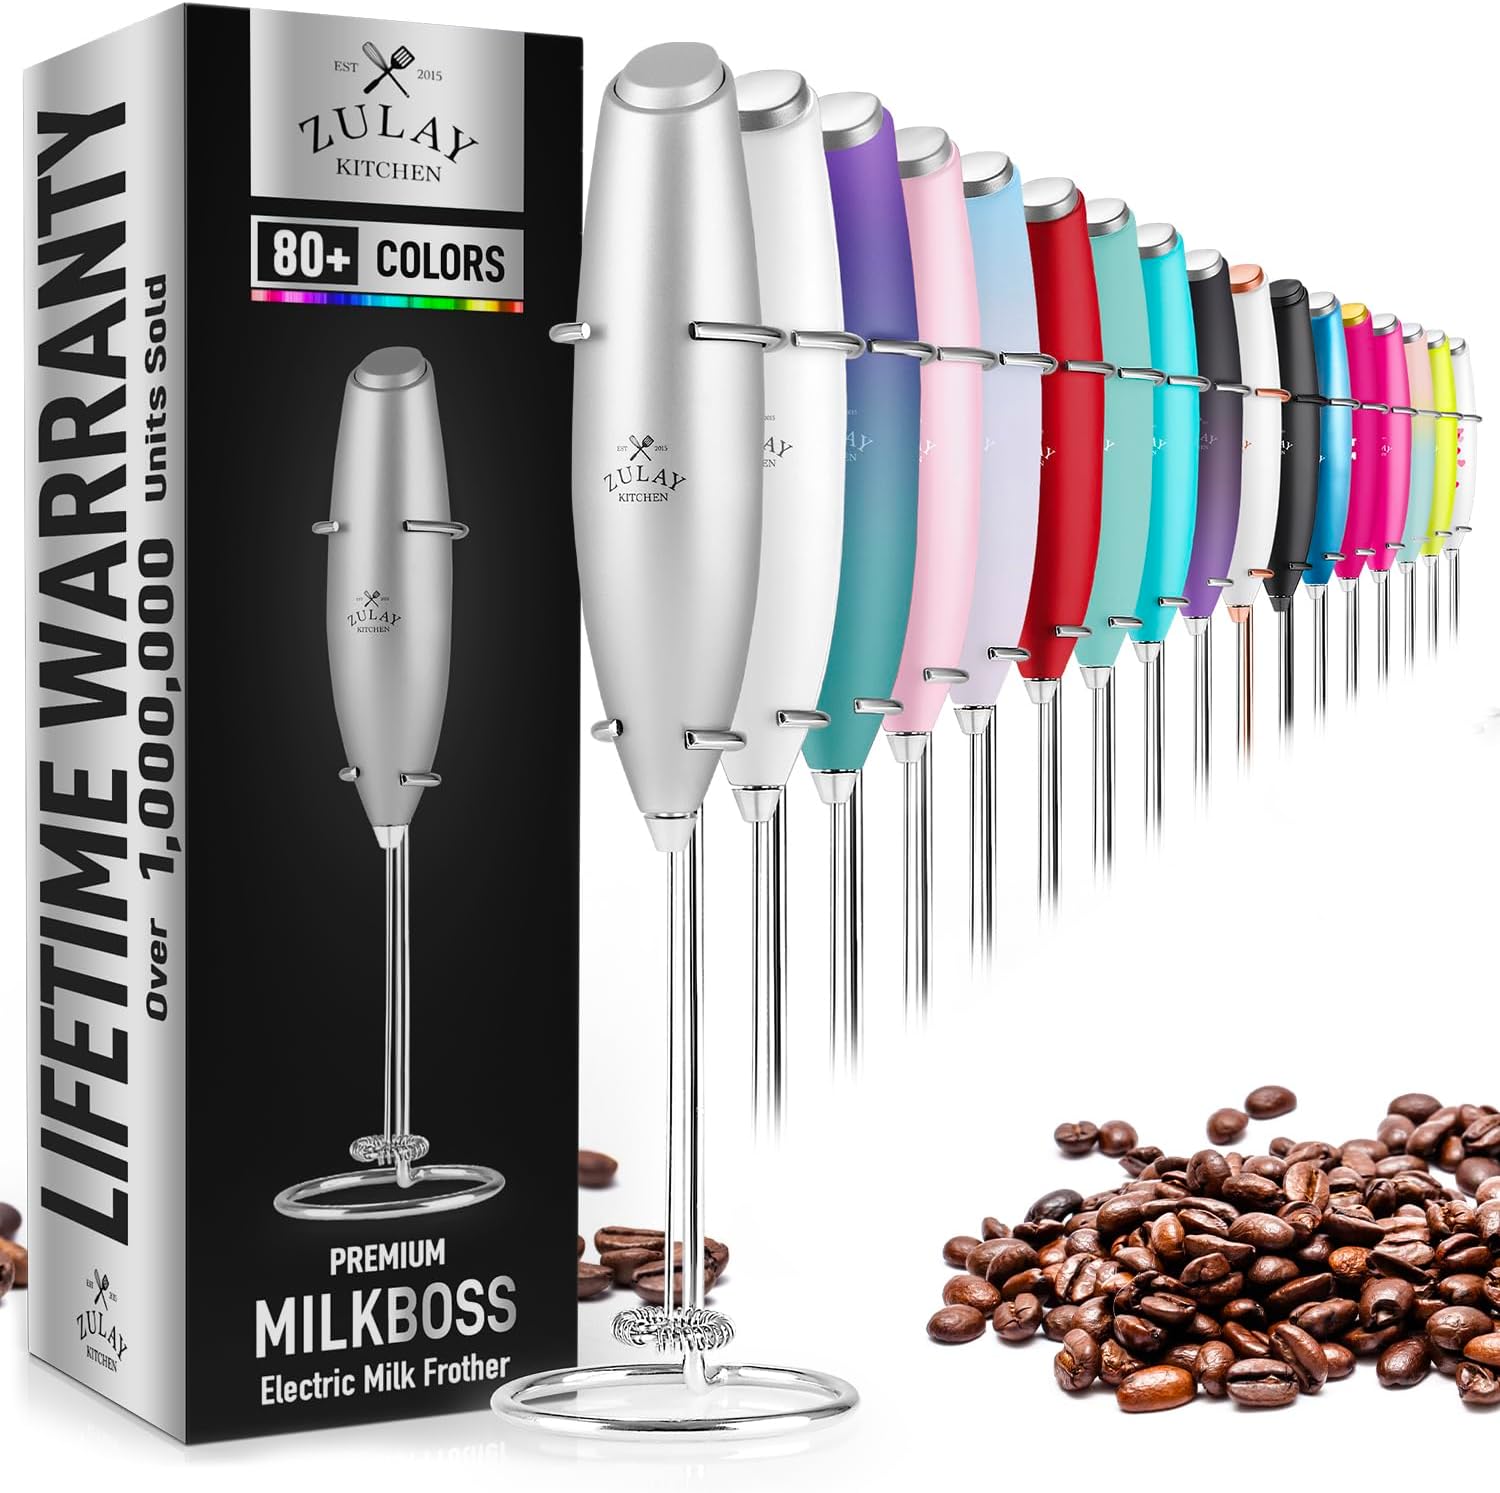 Electric milk frother – Dairy Farmers of America, Inc.